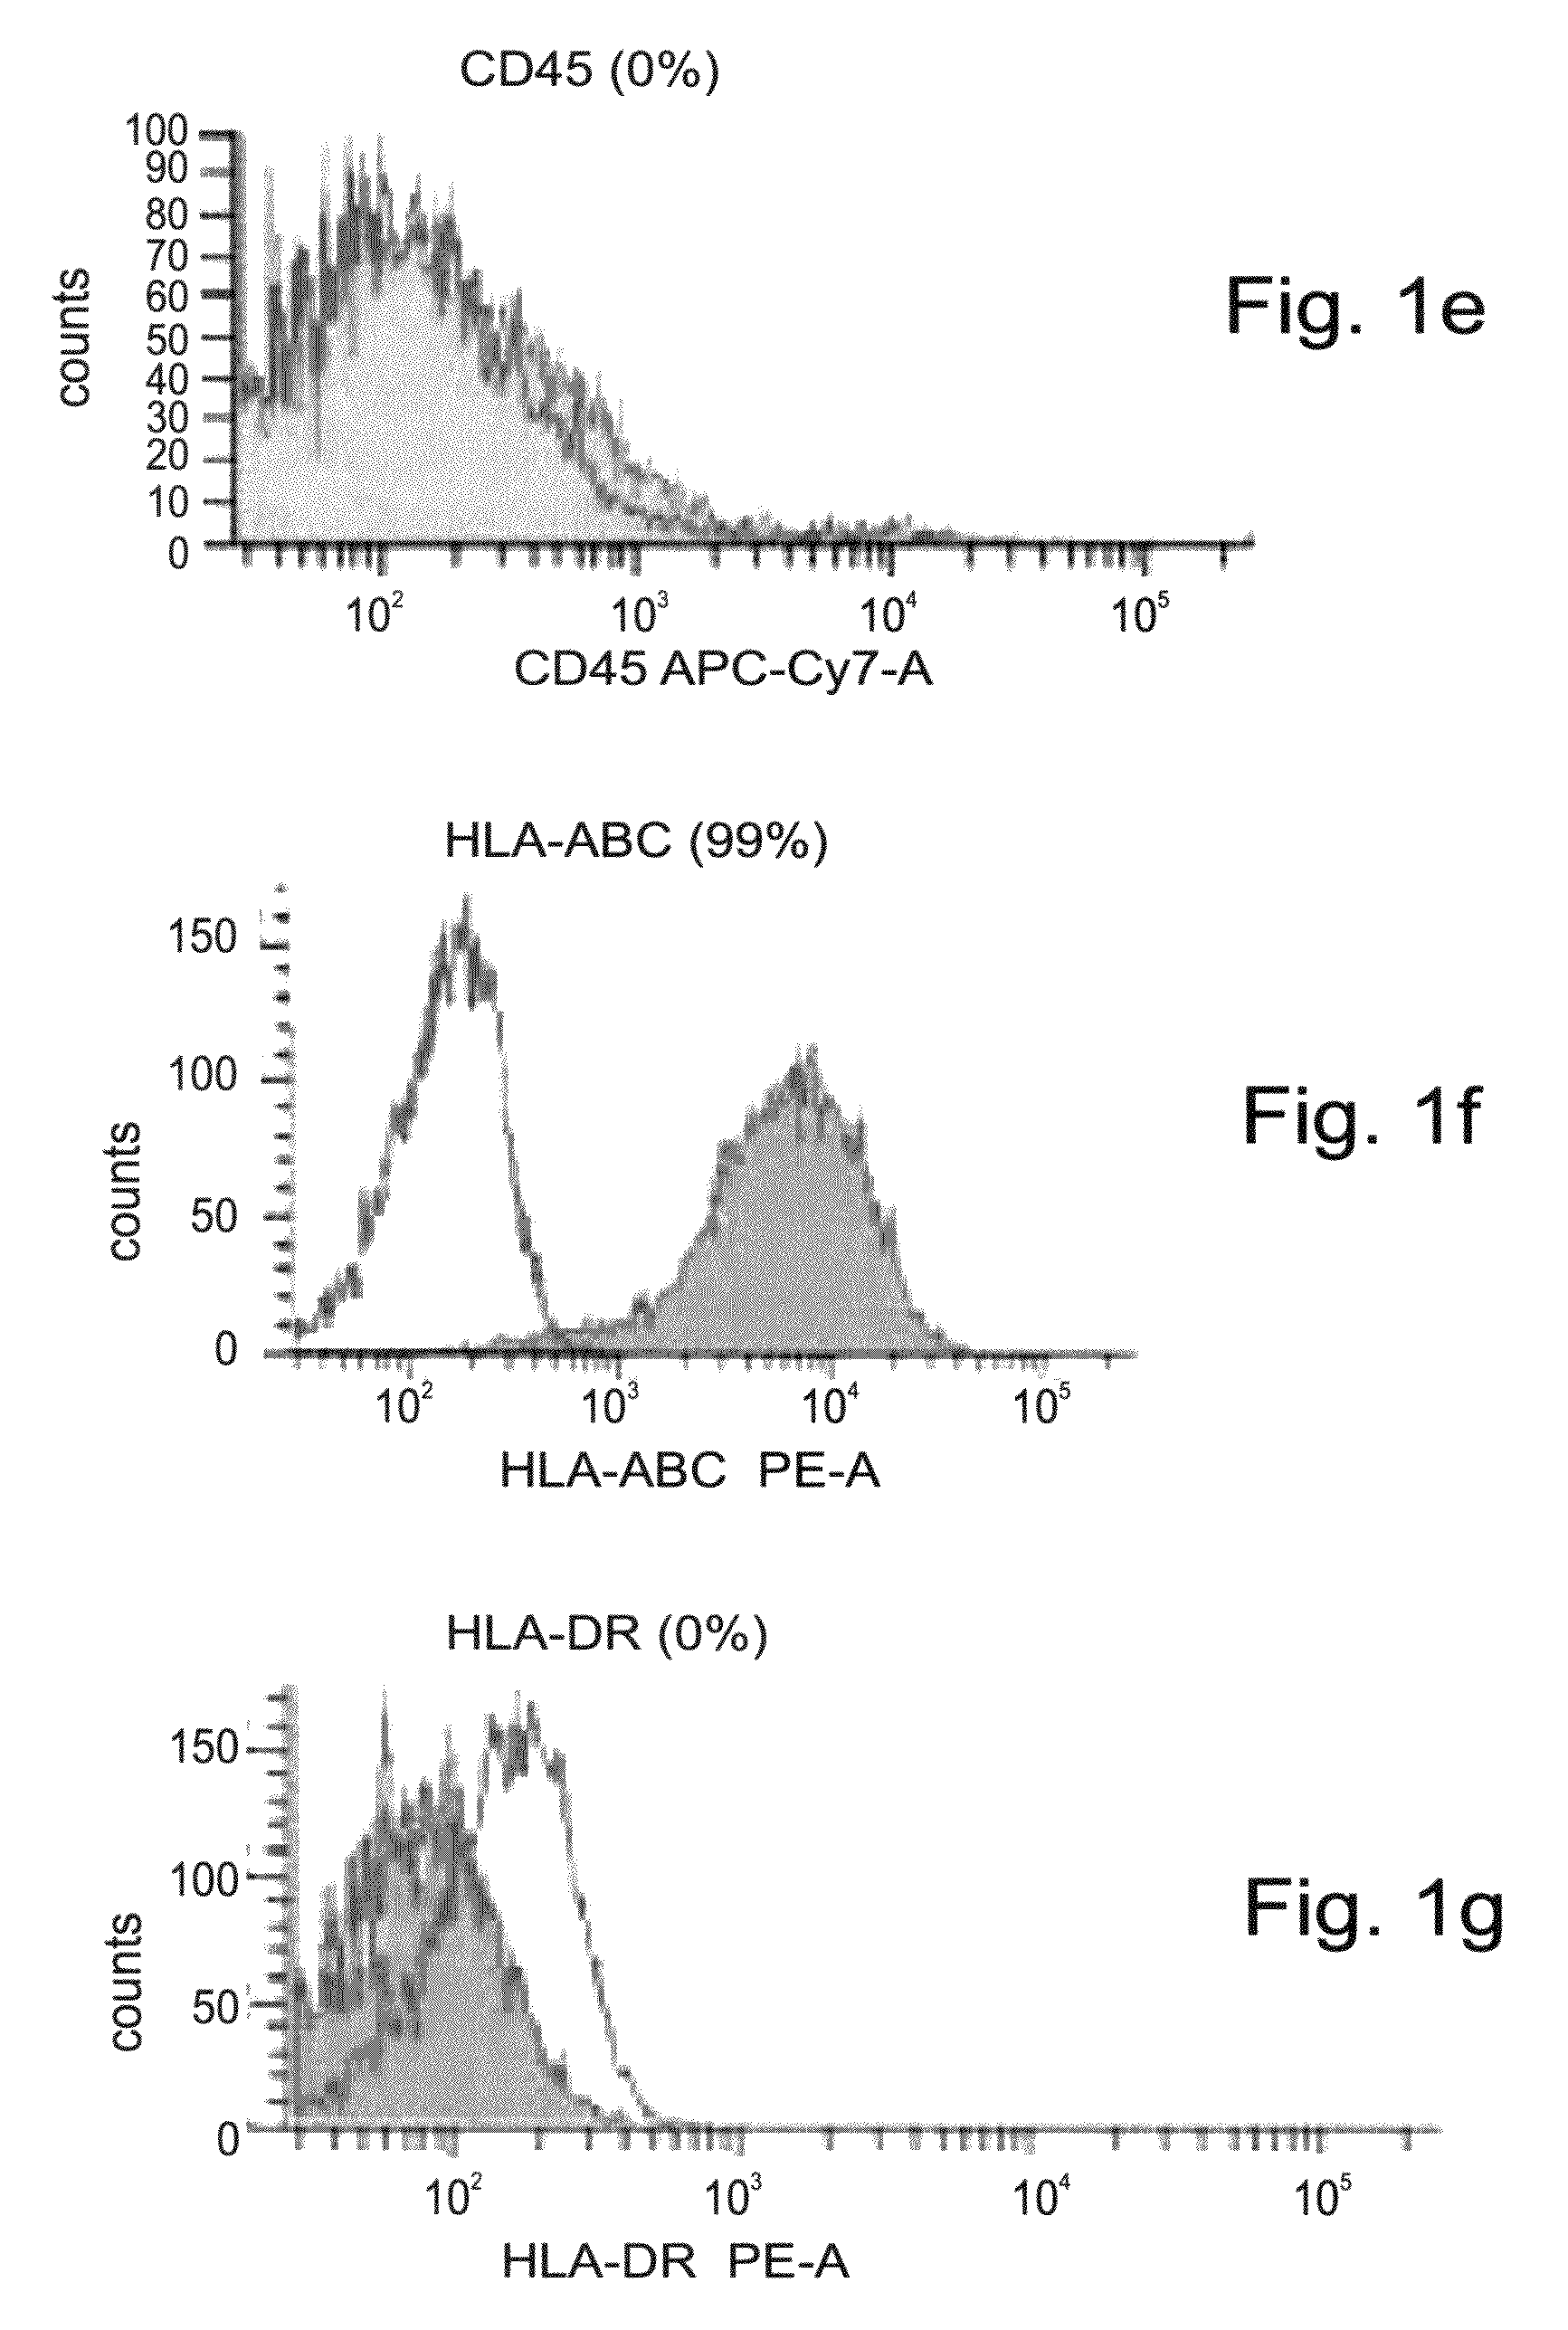 Adult Stem Cell-Derived Connective Tissue Progenitors for Tissue Engineering